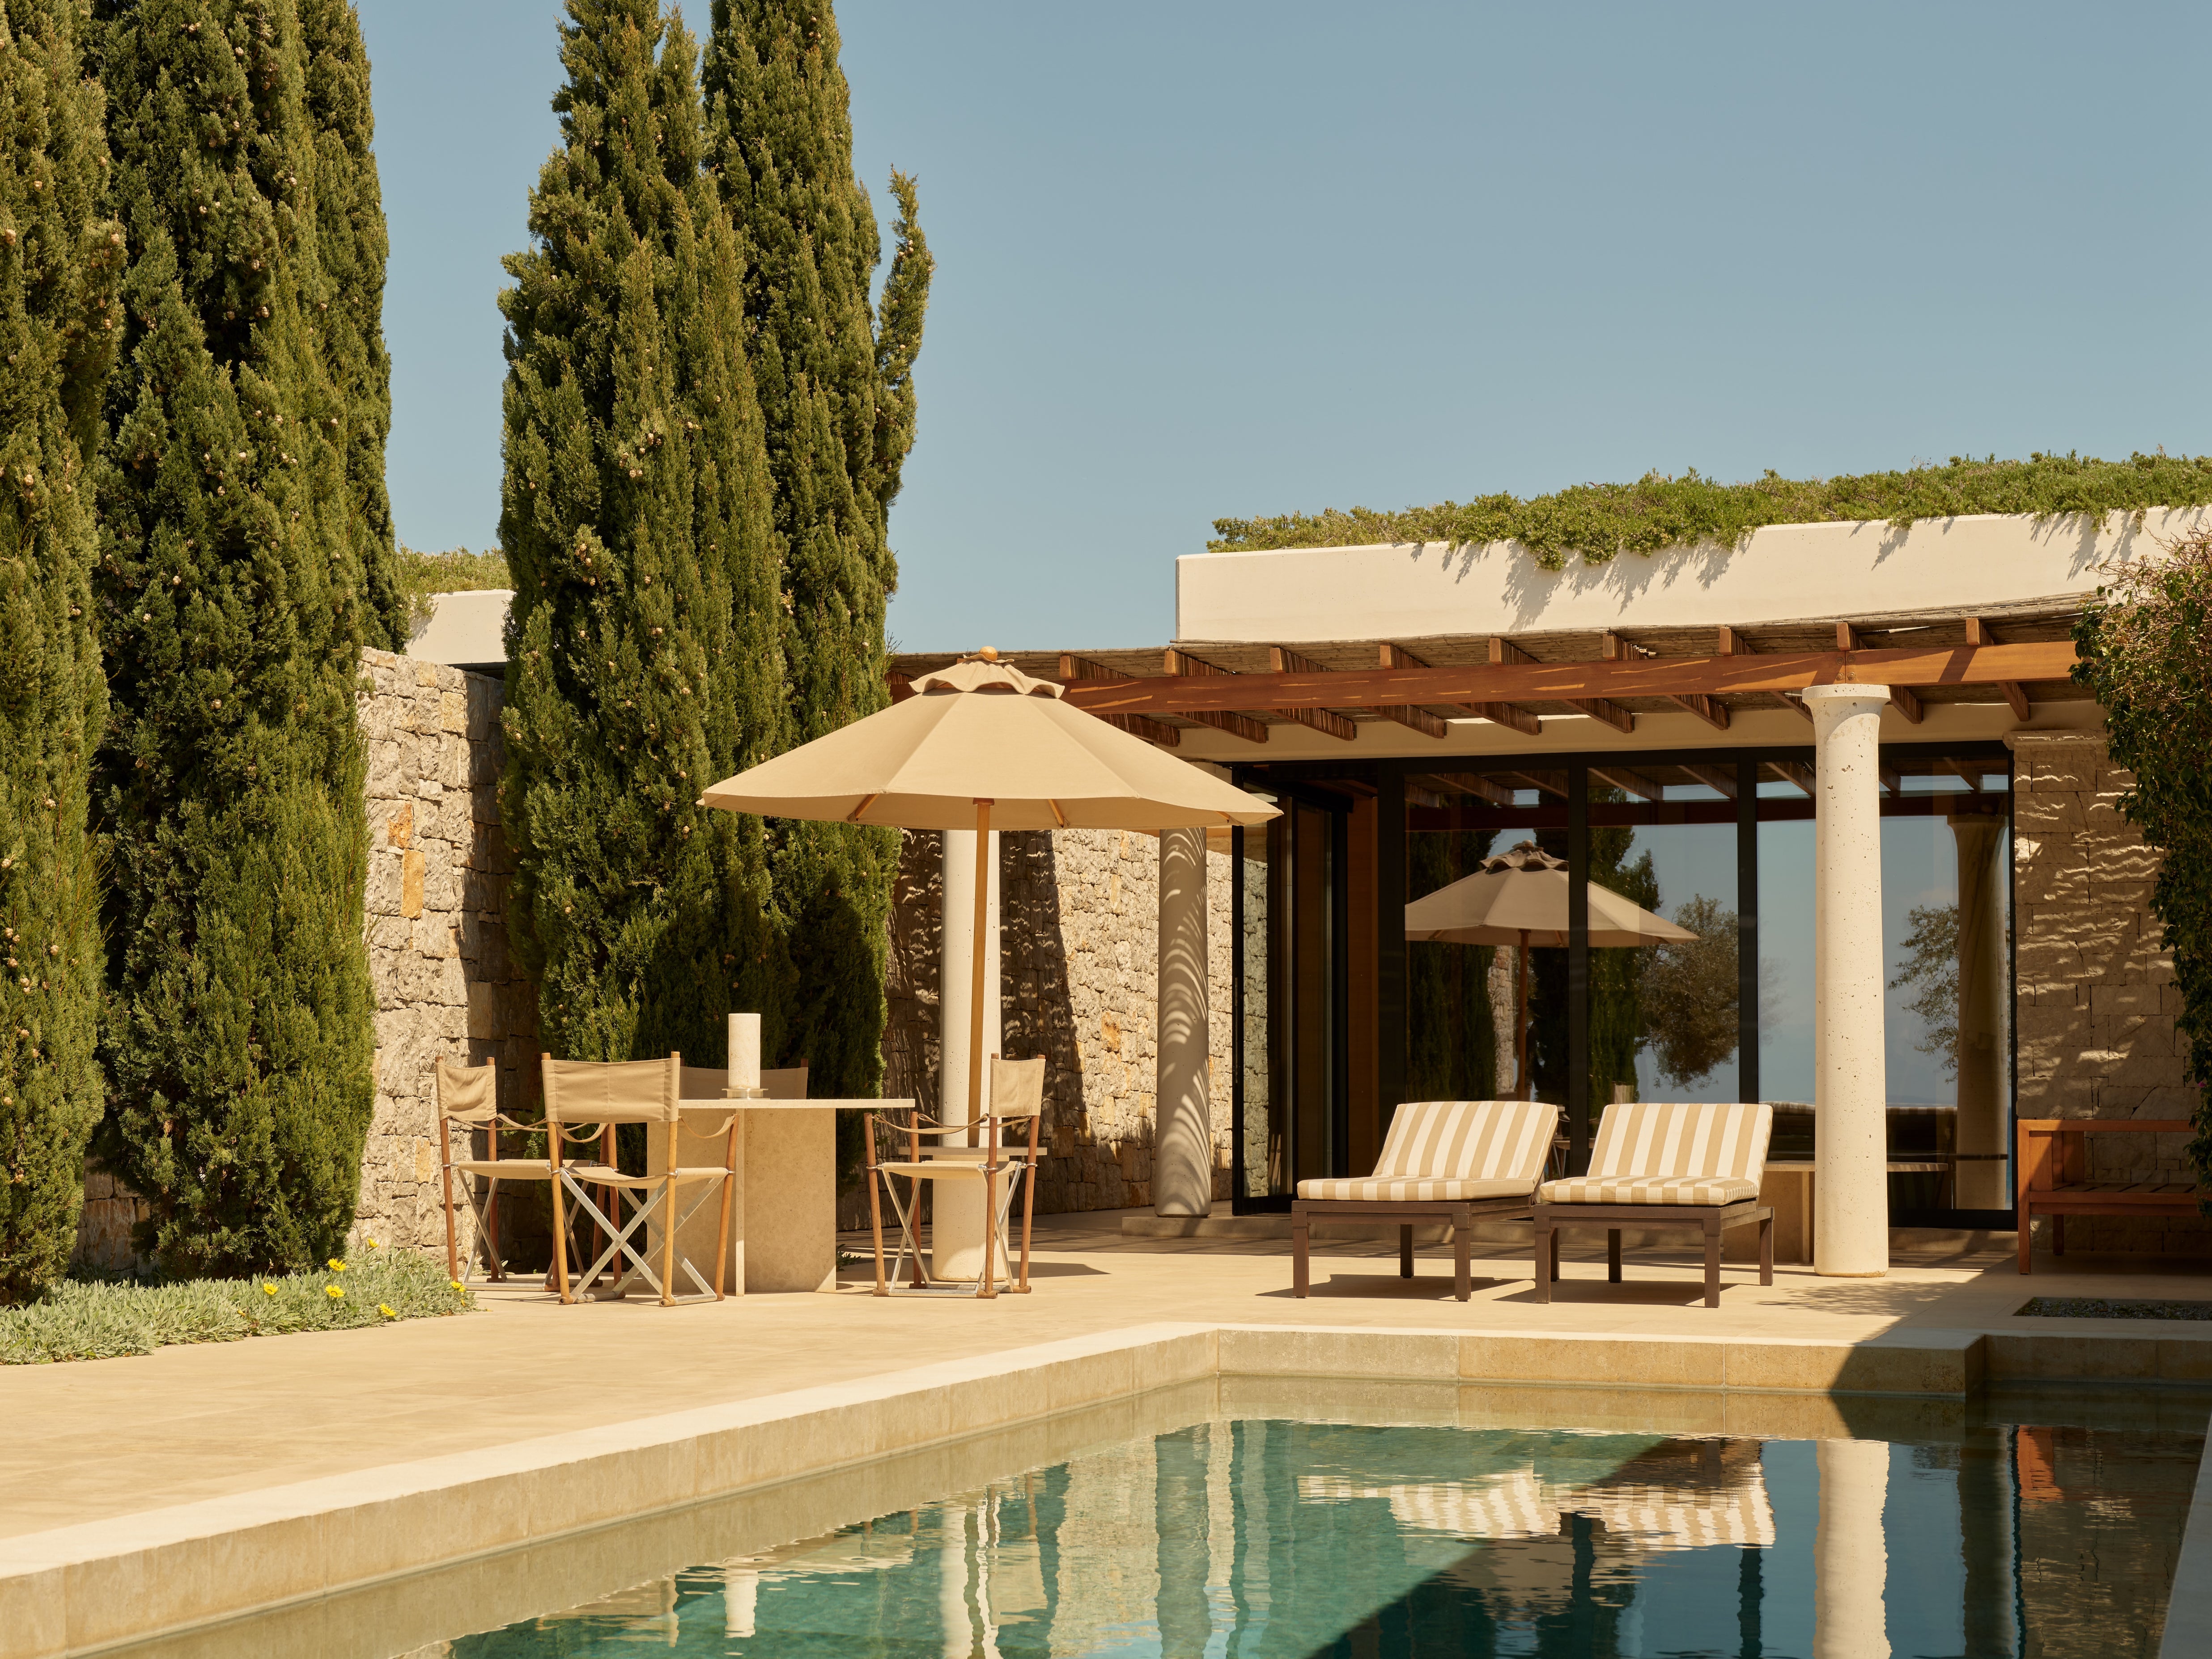 Villas have stone-walled courtyards, plunge pools and a private chef